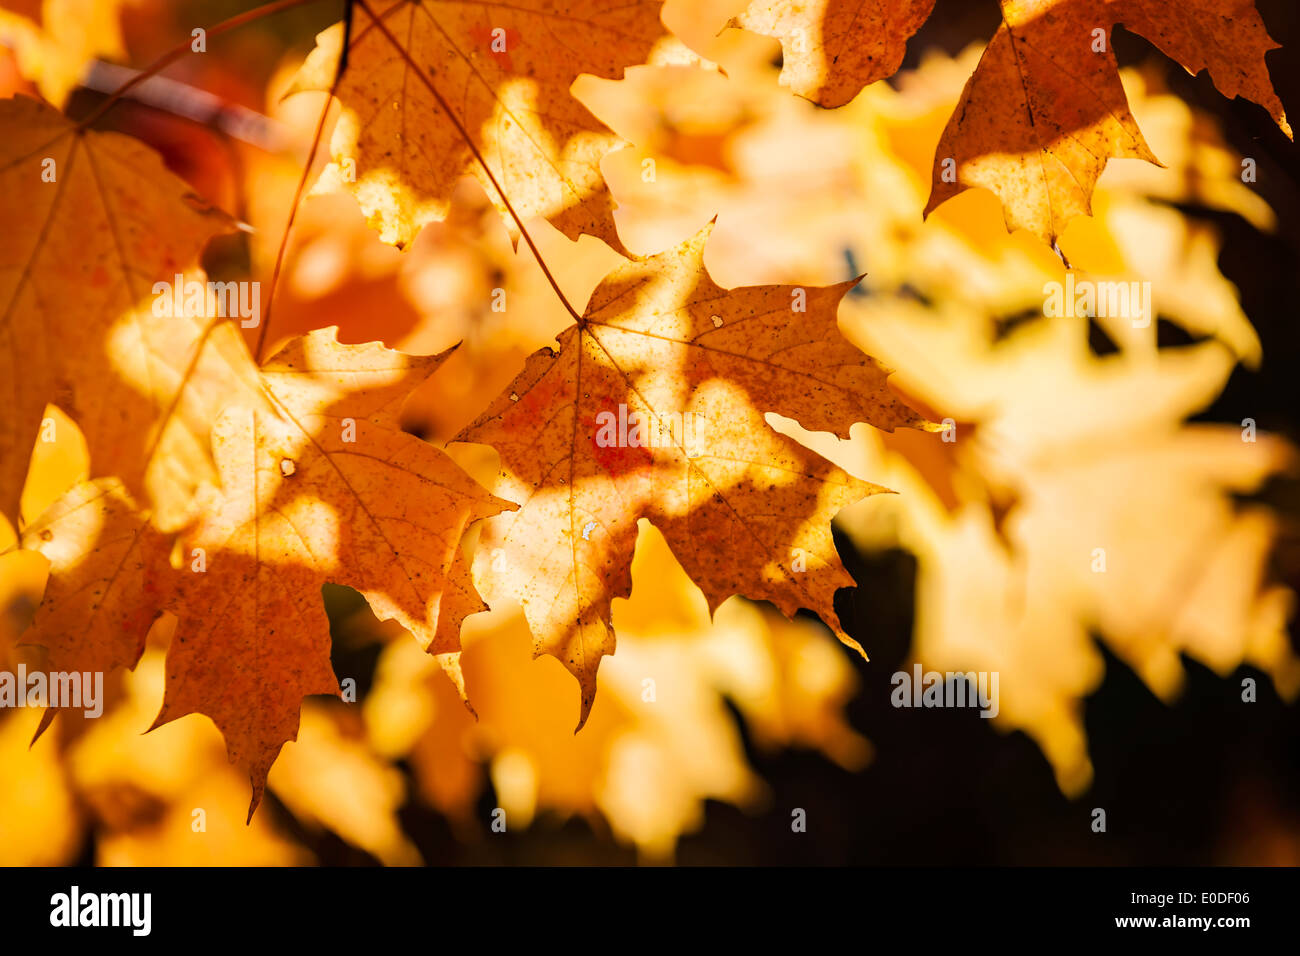 Orange backlit fall leaves on maple tree branch glowing in autumn sunshine Stock Photo